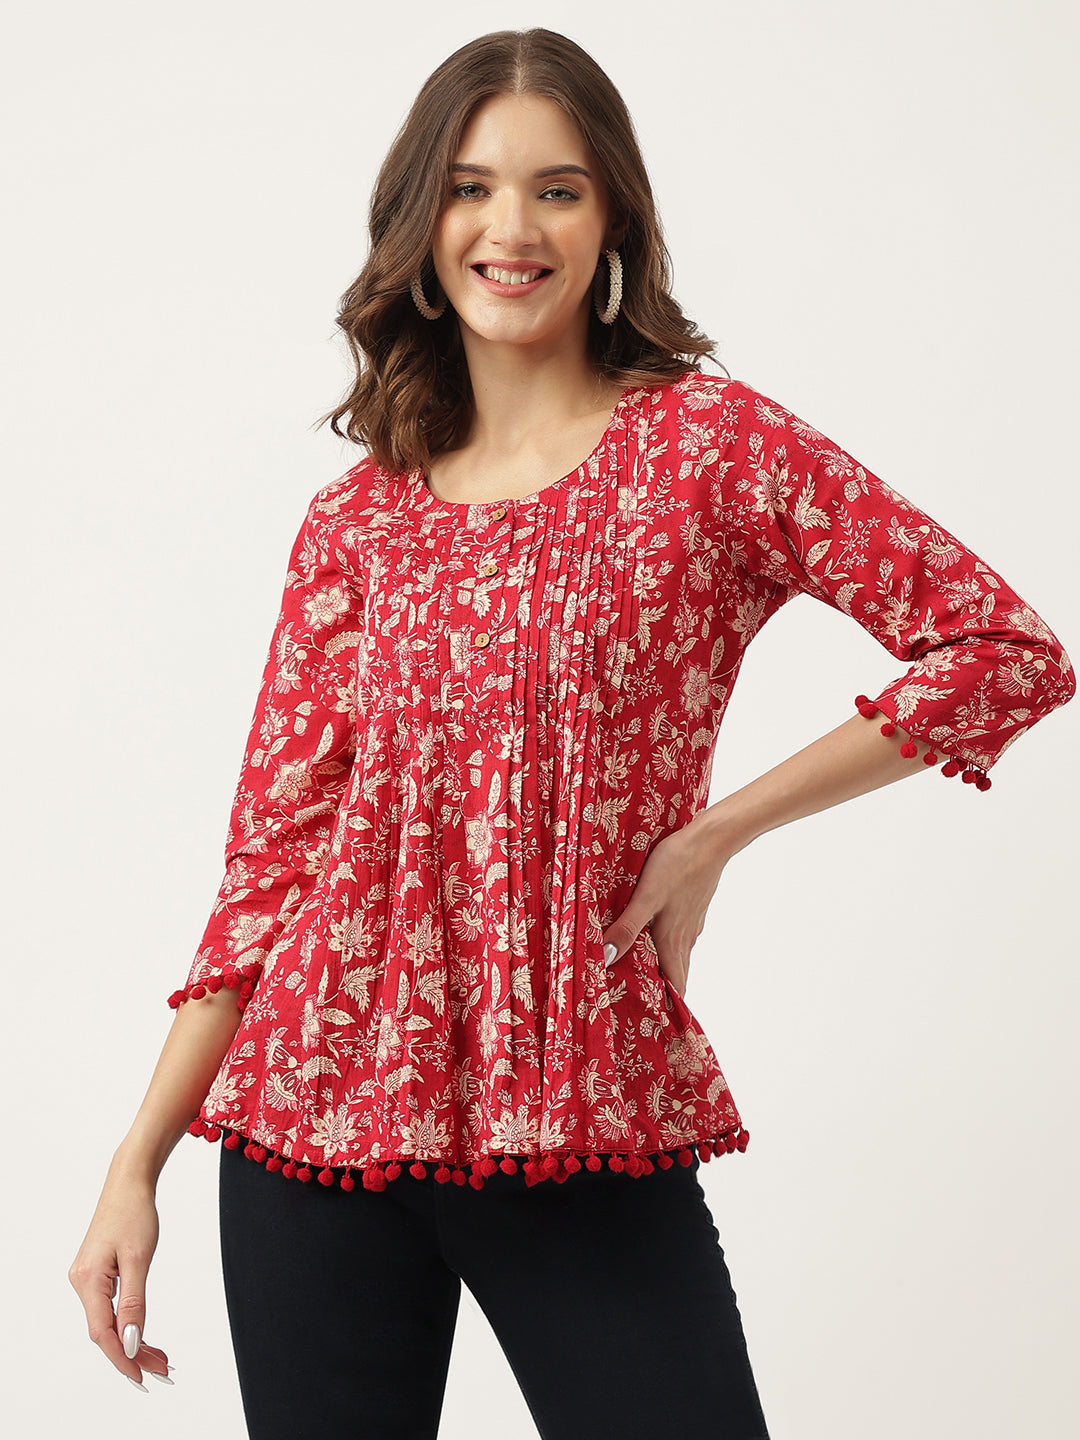 Divena Red Floral Printed Cotton Peplum Top